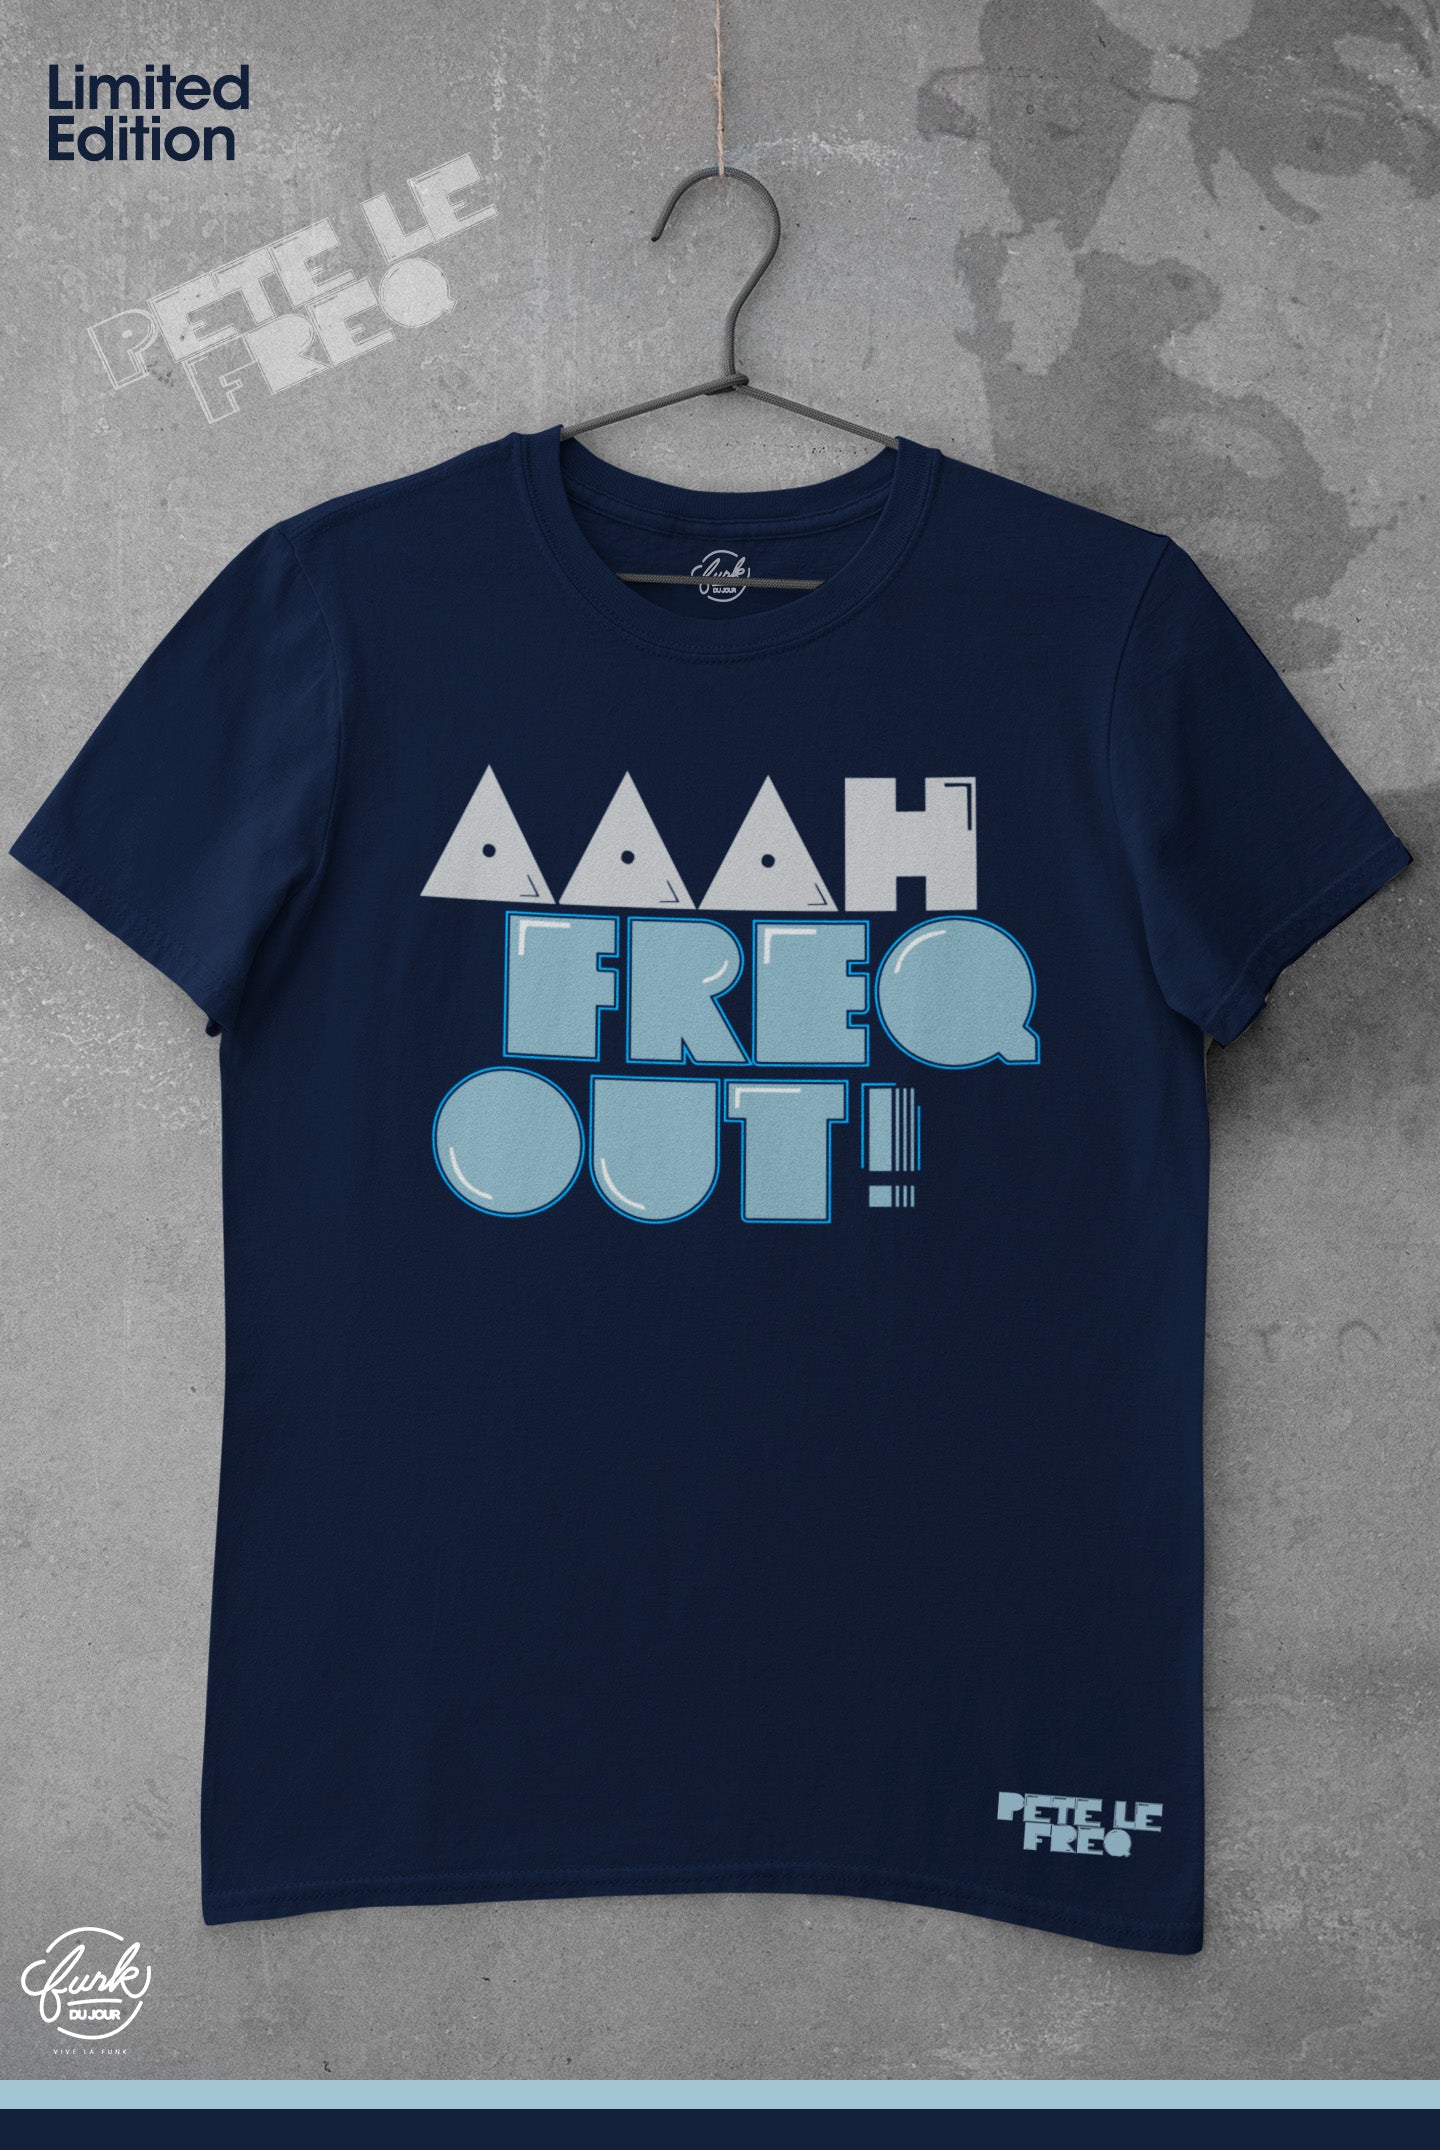 Pete Le Freq Special Edition Tee